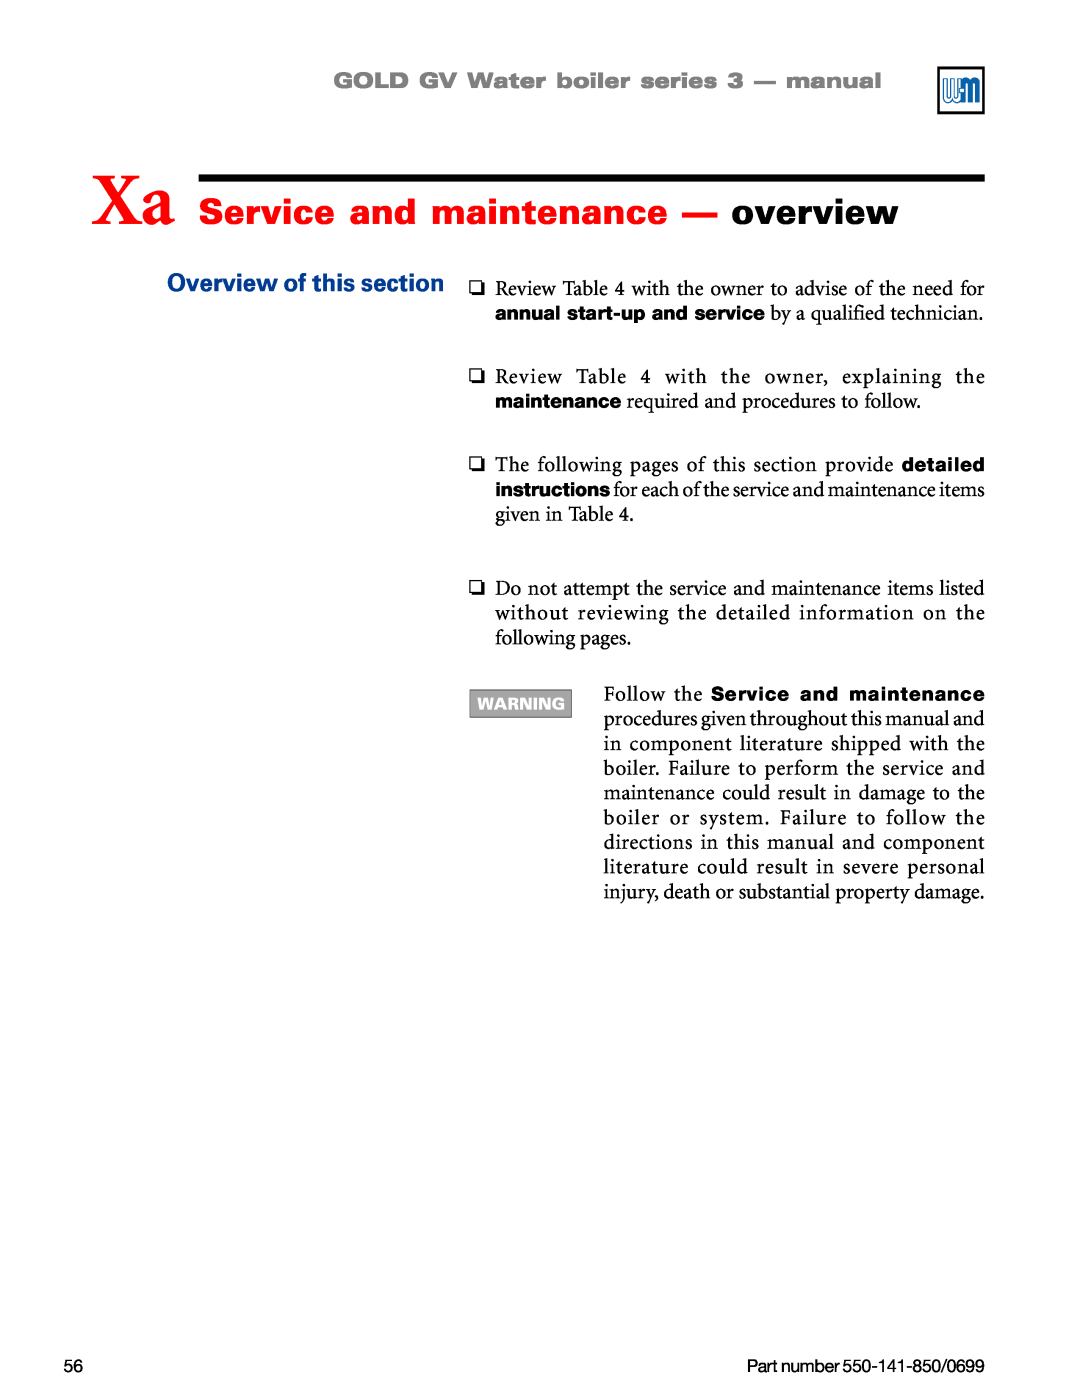 Weil-McLain GOLD DV WATER BOILER Xa Service and maintenance - overview, GOLD GV Water boiler series 3 — manual 